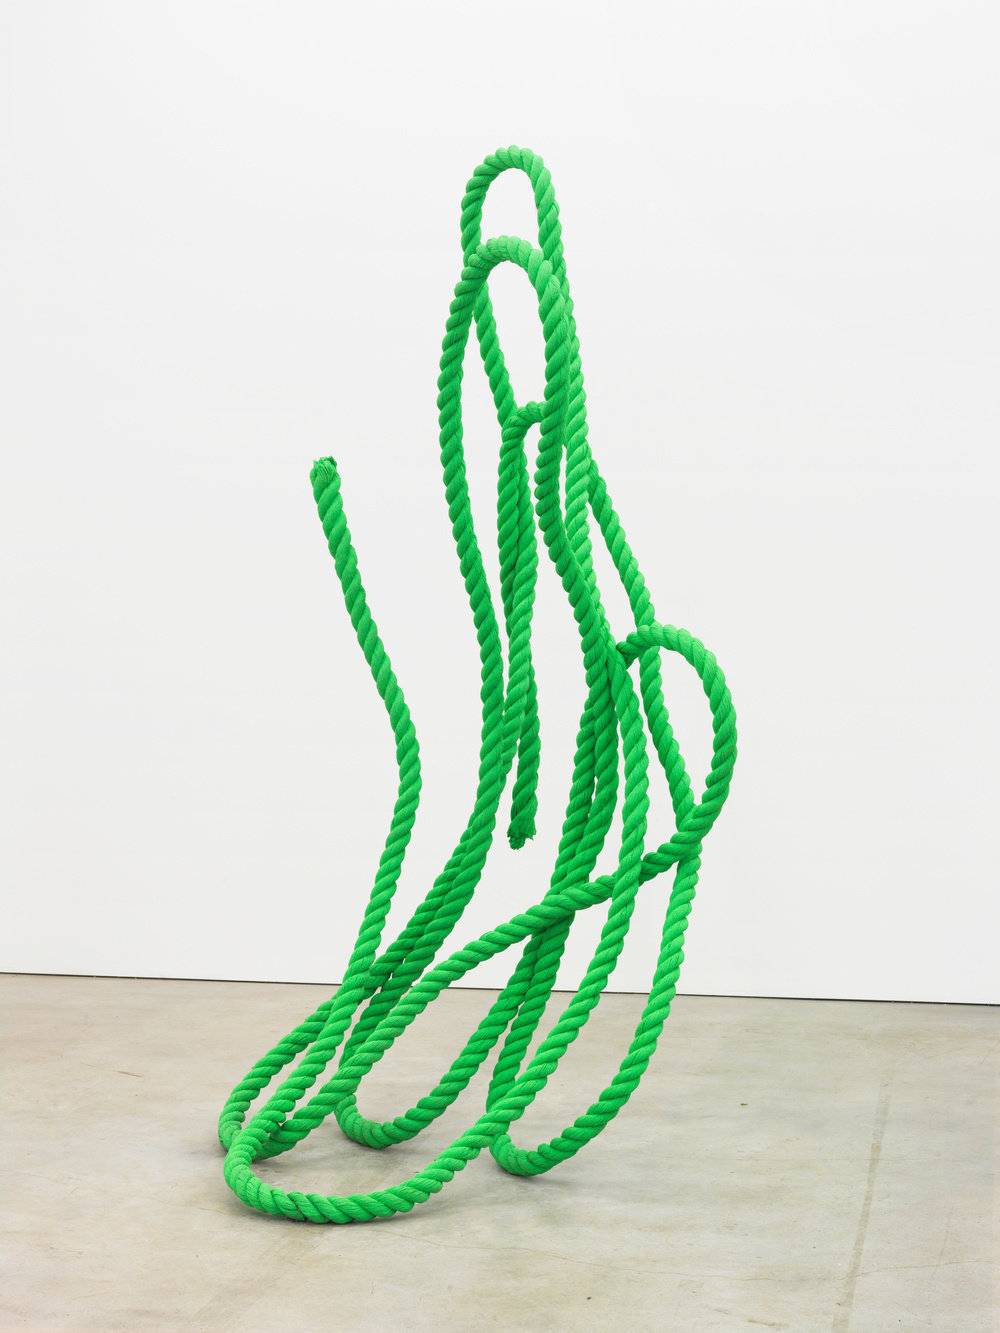 Matelli, untitled (view 2), 2015, silicone and stainless steel, 104 x 55 x 55 in. 264.16 x 139.7 x 139.7 cm cnon 56.760